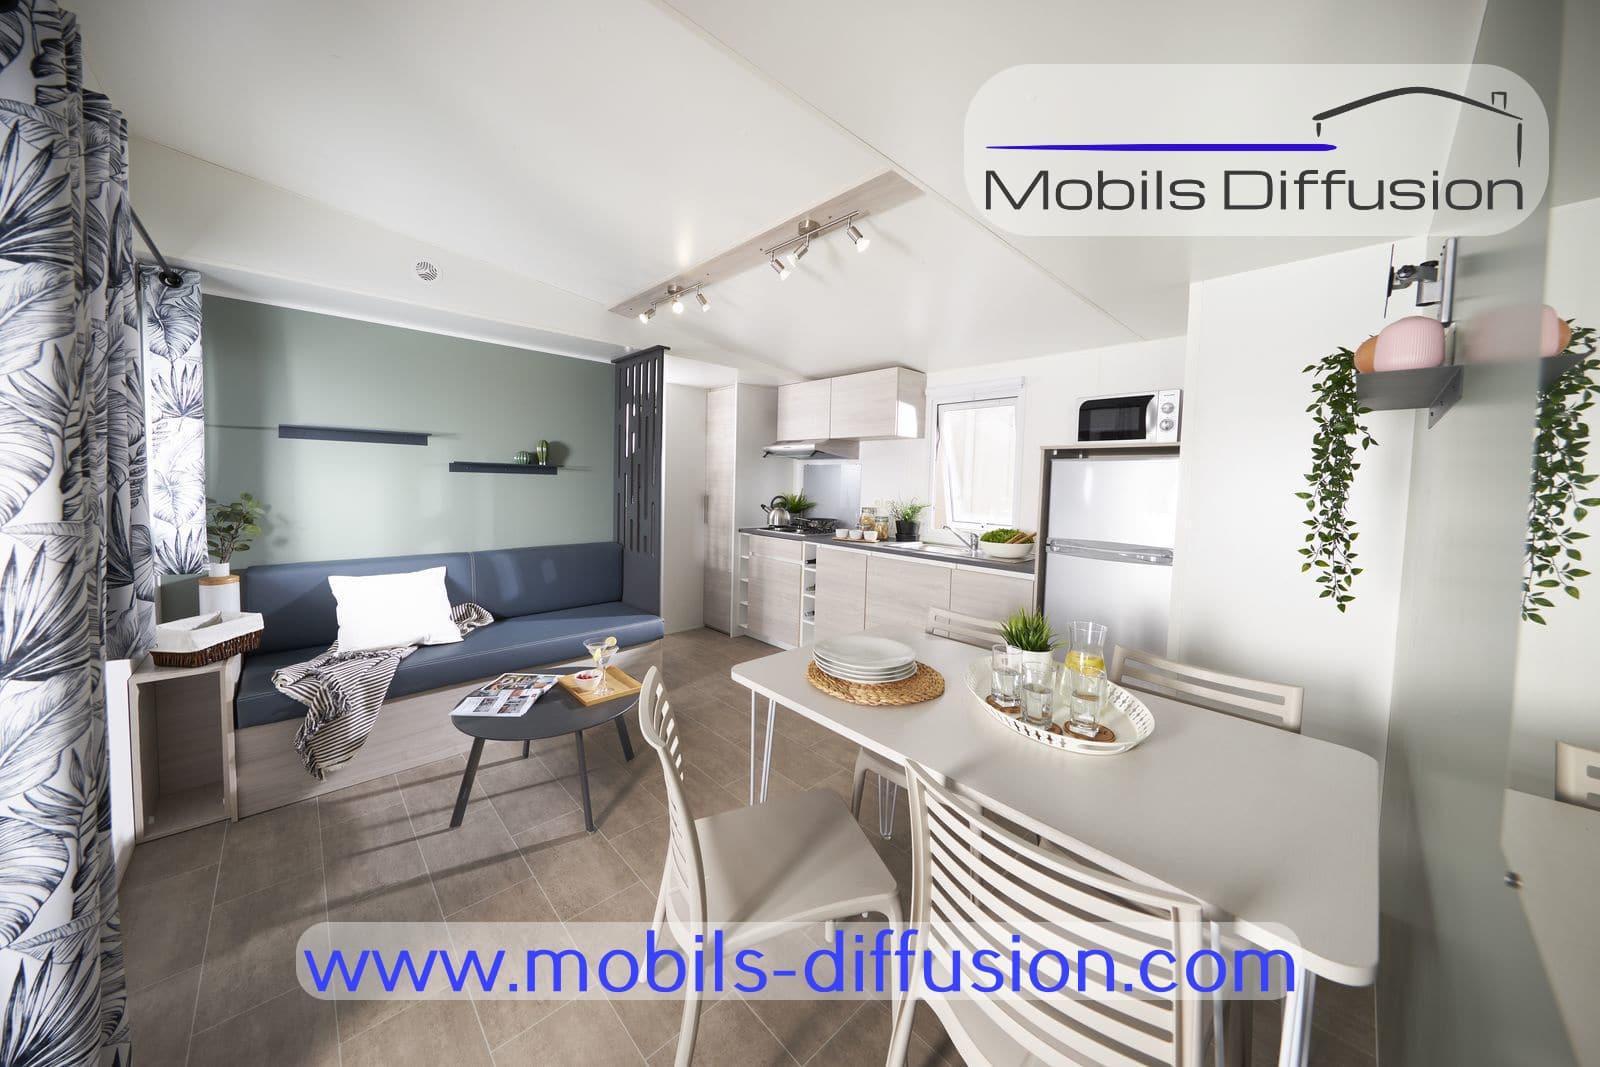 Mobils Diffusion - New mobile home Trigano evolution 35 / 2 bedrooms and 2 bathrooms / 2022